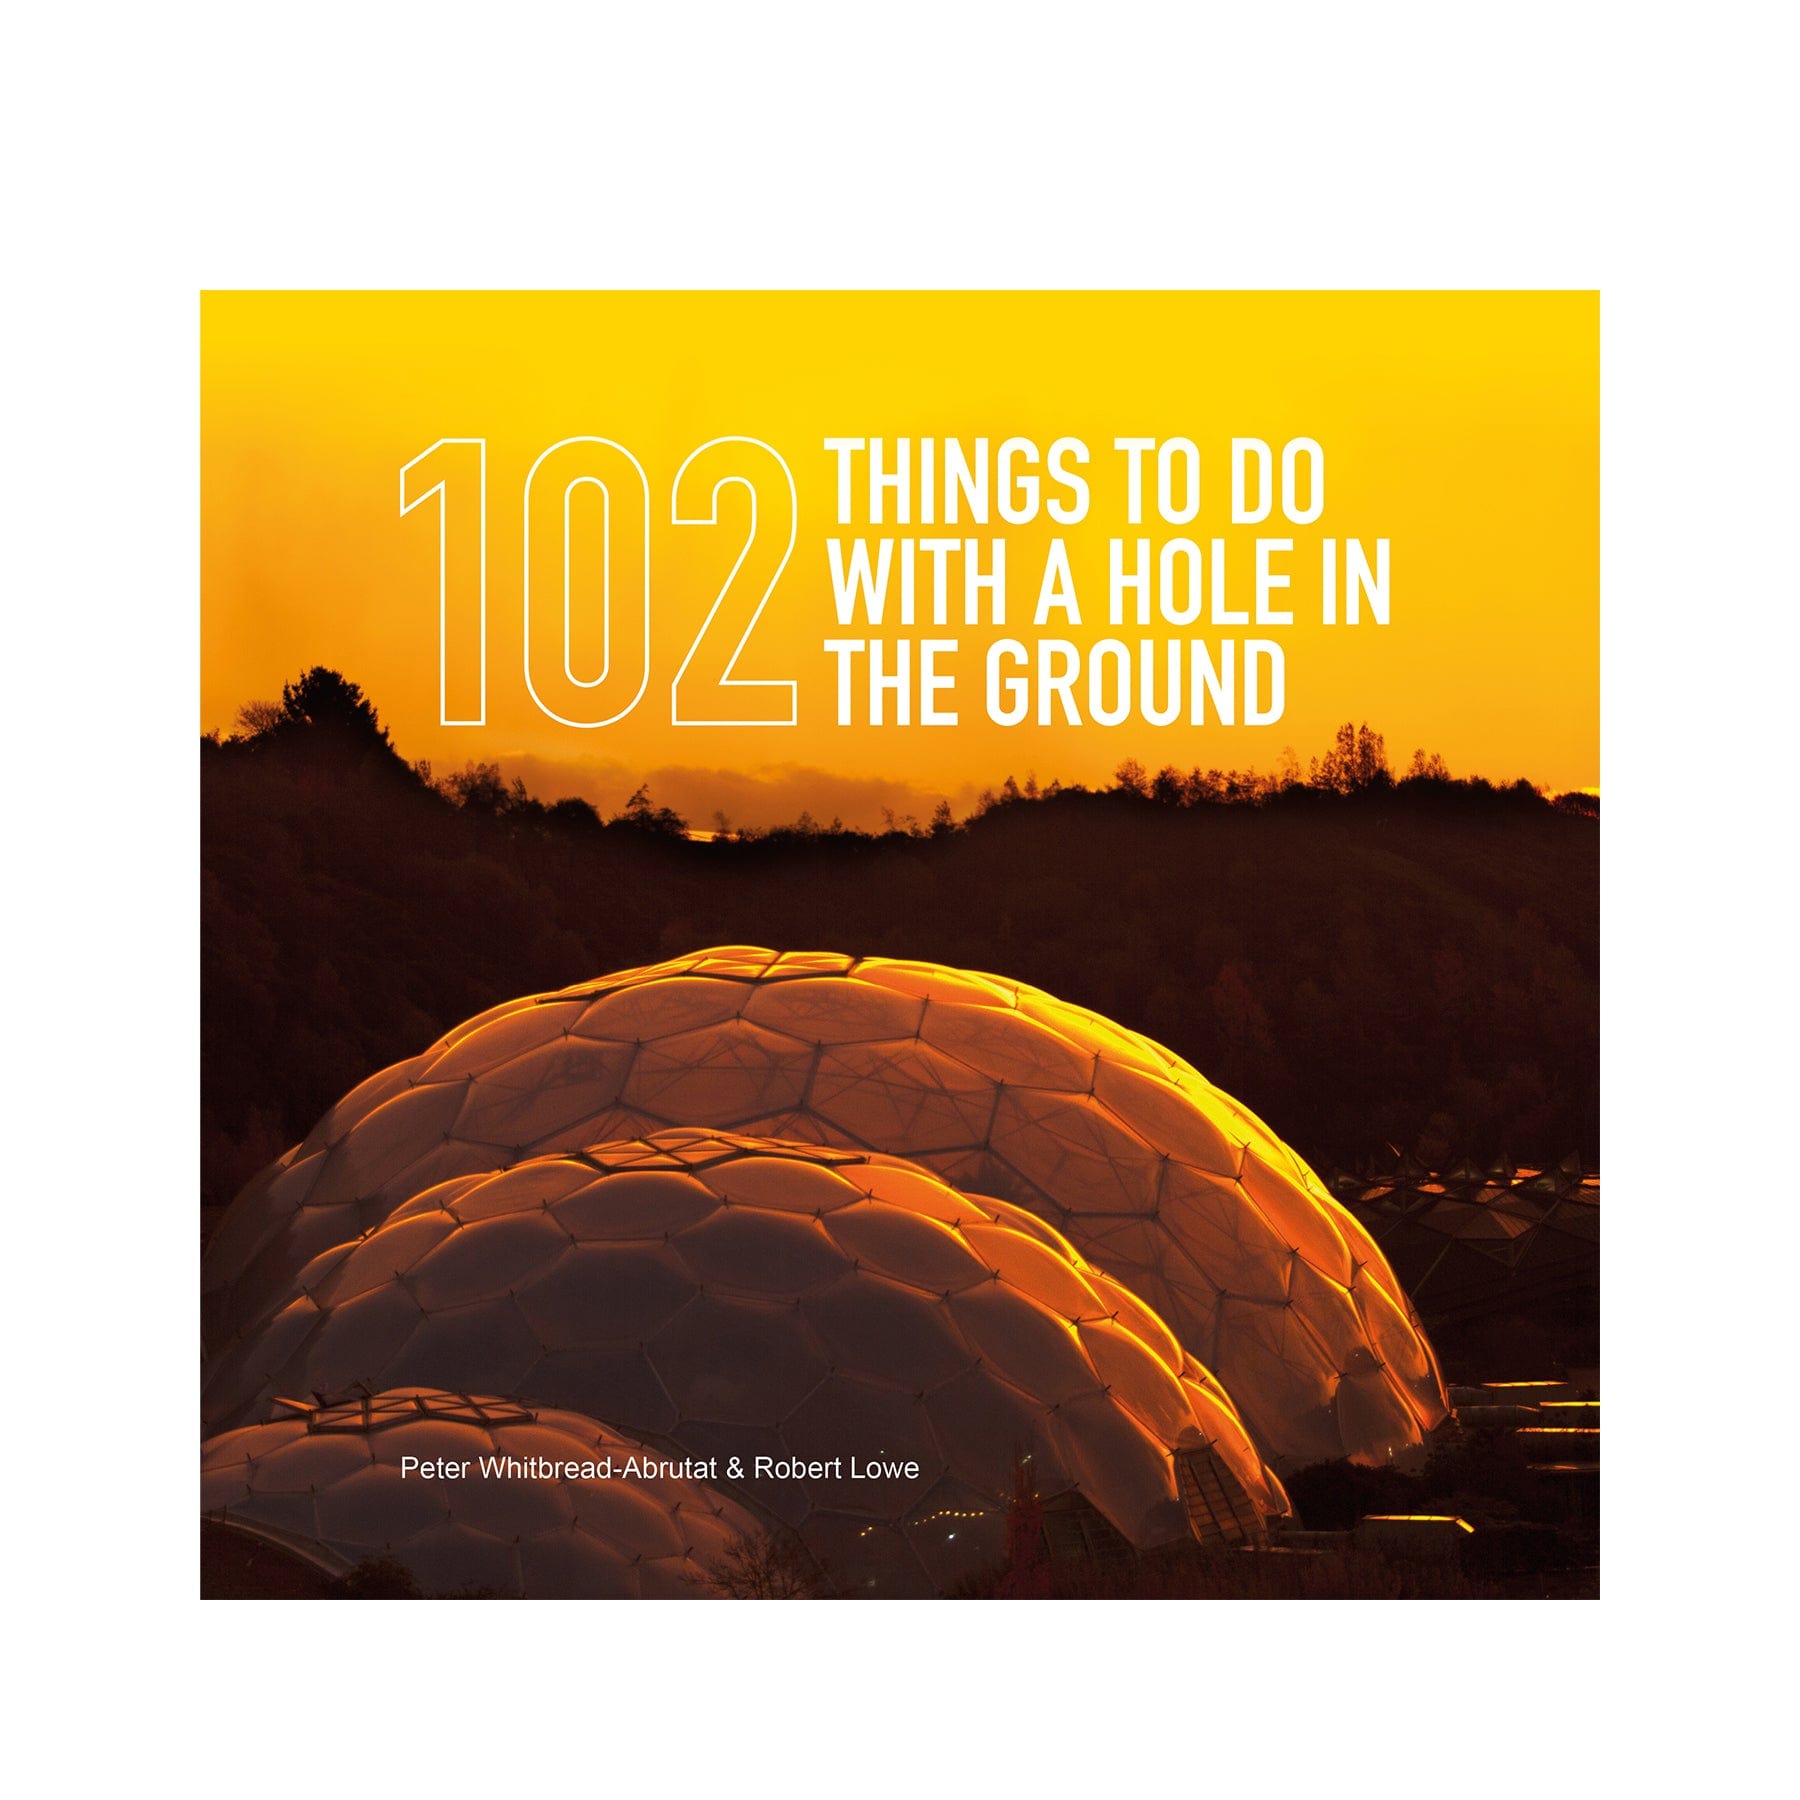 102 Things to Do with a Hole in the Ground